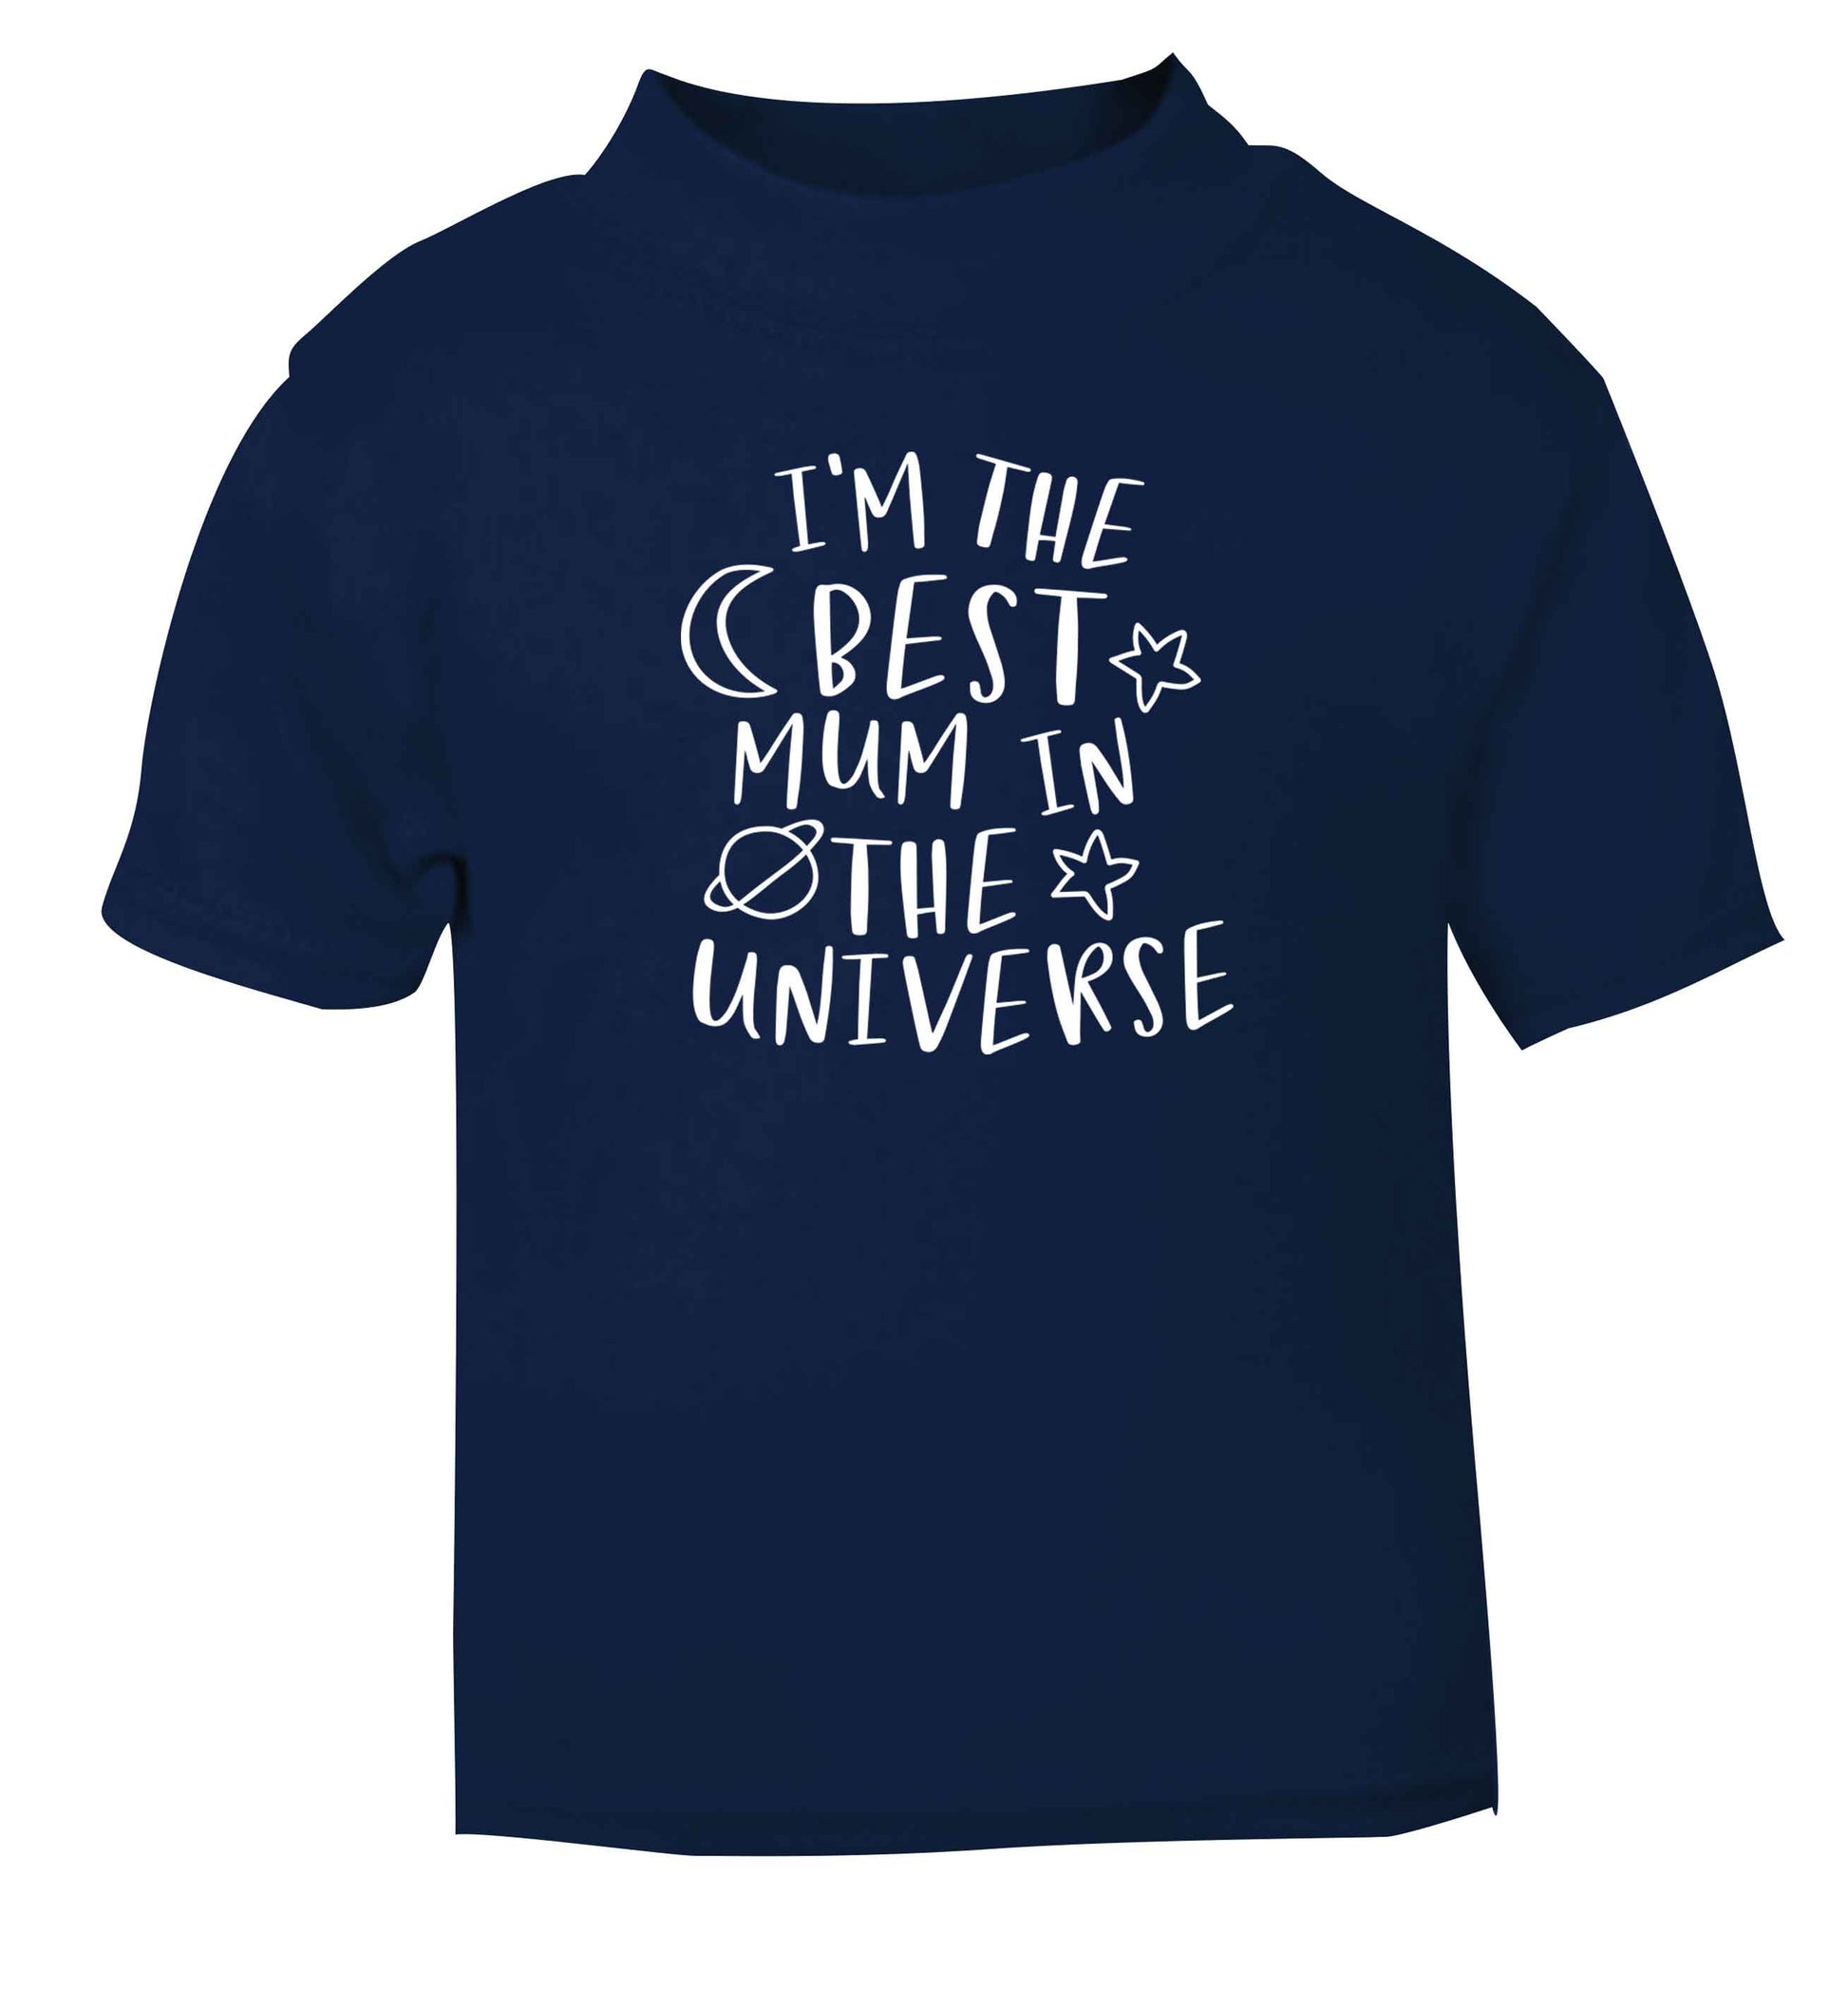 I'm the best mum in the universe navy baby toddler Tshirt 2 Years